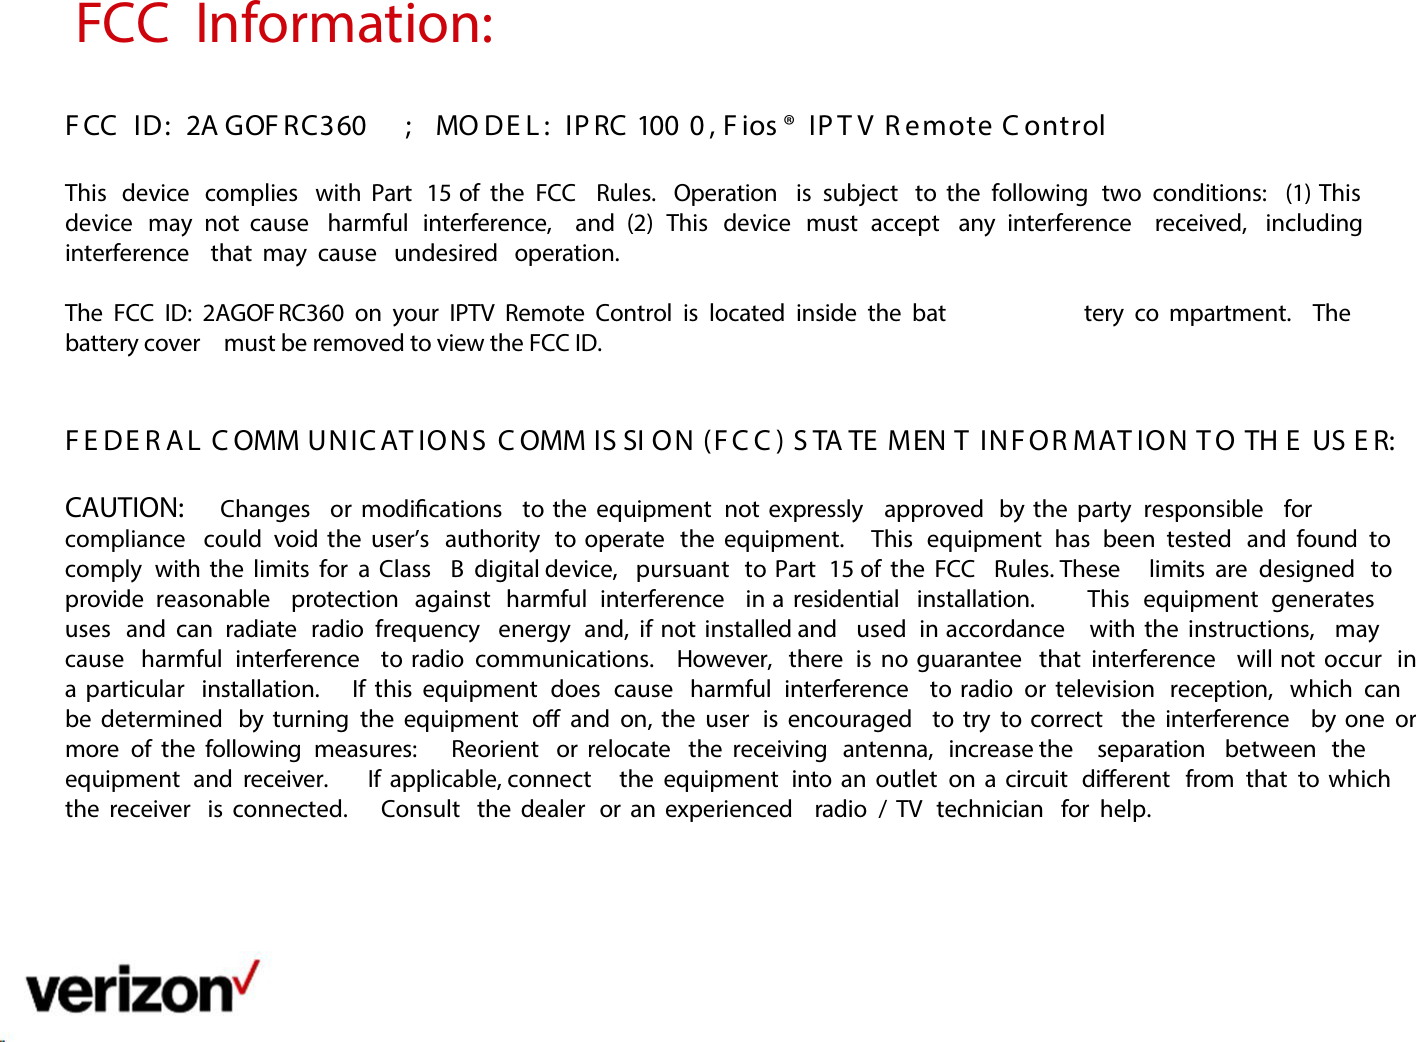 FCC  Information:    F CC  ID:  2A GOF RC360 ;  MO DE L :  IP RC 100 0 , F ios ®  IP T V  R emote C ontrol   This  device  complies  with Part  15 of  the  FCC   Rules.  Operation  is subject   to the  following  two  conditions:  (1) This  device  may   not  cause   harmful  interference,  and   (2)  This  device  must   accept  any   interference  received,  including  interference  that may  cause  undesired  operation.   The  FCC  ID:  2AGOF RC360  on  your  IPTV  Remote  Control  is  located  inside the  bat tery  co mpartment.  The battery cover  must be removed to view the FCC ID.    F E DE R A L  C OMM UNIC AT IONS  C OMM IS SI ON (F C C ) S TA TE MEN T  INF OR MAT IO N T O  TH E  US E R:  CAUTION:   Changes  or modications  to the equipment  not expressly  approved  by the  party  responsible  for  compliance  could  void the  user’s  authority  to operate  the equipment.    This  equipment  has  been  tested  and found  to comply  with the limits for  a  Class  B  digital device,  pursuant  to Part  15 of the FCC  Rules. These  limits  are  designed  to provide  reasonable  protection  against  harmful  interference  in a  residential  installation.   This  equipment  generates  uses  and  can  radiate  radio  frequency  energy  and,  if not installed and  used  in accordance  with the  instructions,  may  cause  harmful  interference  to radio  communications.   However,  there  is no guarantee  that interference  will not occur  in a  particular  installation.   If this  equipment  does  cause  harmful  interference  to radio  or television  reception,  which  can  be determined  by turning  the equipment  o  and  on, the user  is encouraged  to try  to correct  the interference  by one  or more  of the following  measures:    Reorient  or relocate  the receiving  antenna,  increase the  separation  between  the equipment  and  receiver.     If  applicable, connect  the equipment  into an outlet  on a  circuit  dierent  from  that to which  the receiver  is connected.    Consult  the dealer  or an experienced  radio  / TV  technician  for  help.         